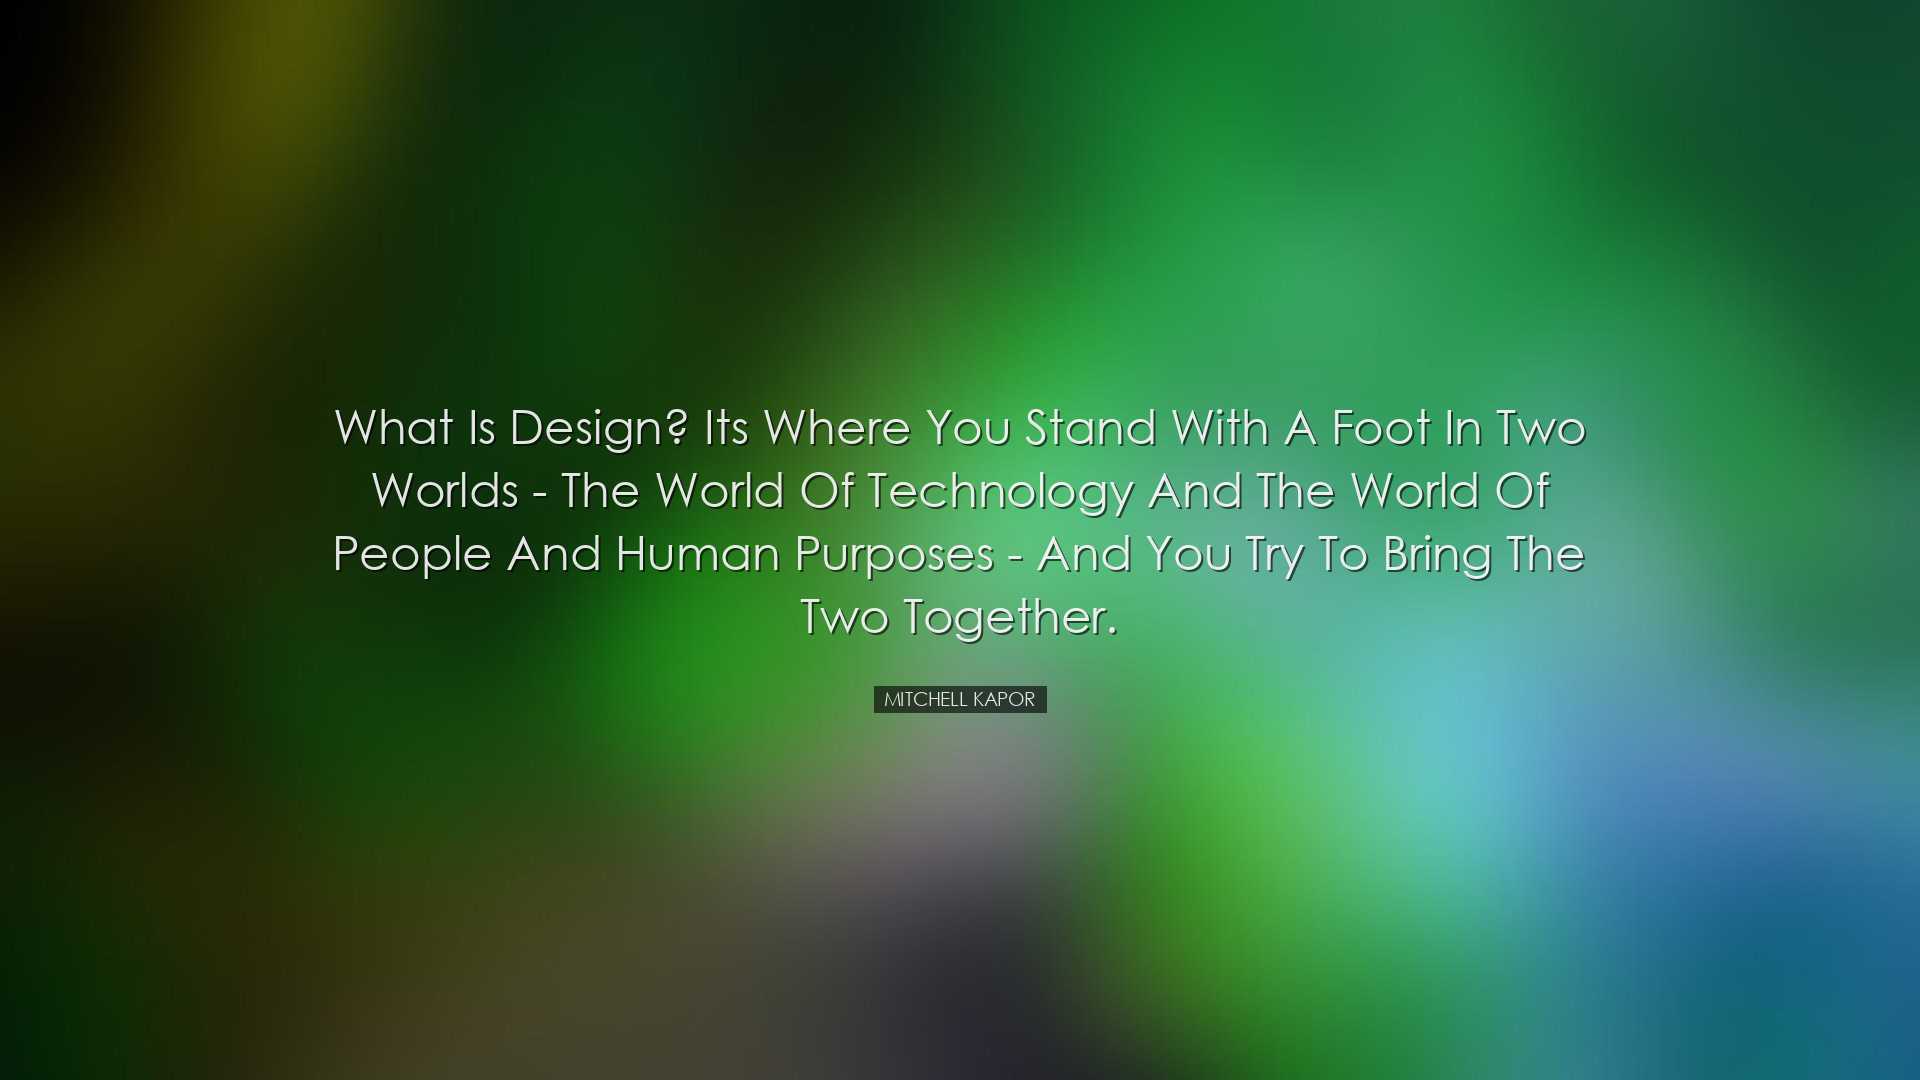 What is design? Its where you stand with a foot in two worlds - th